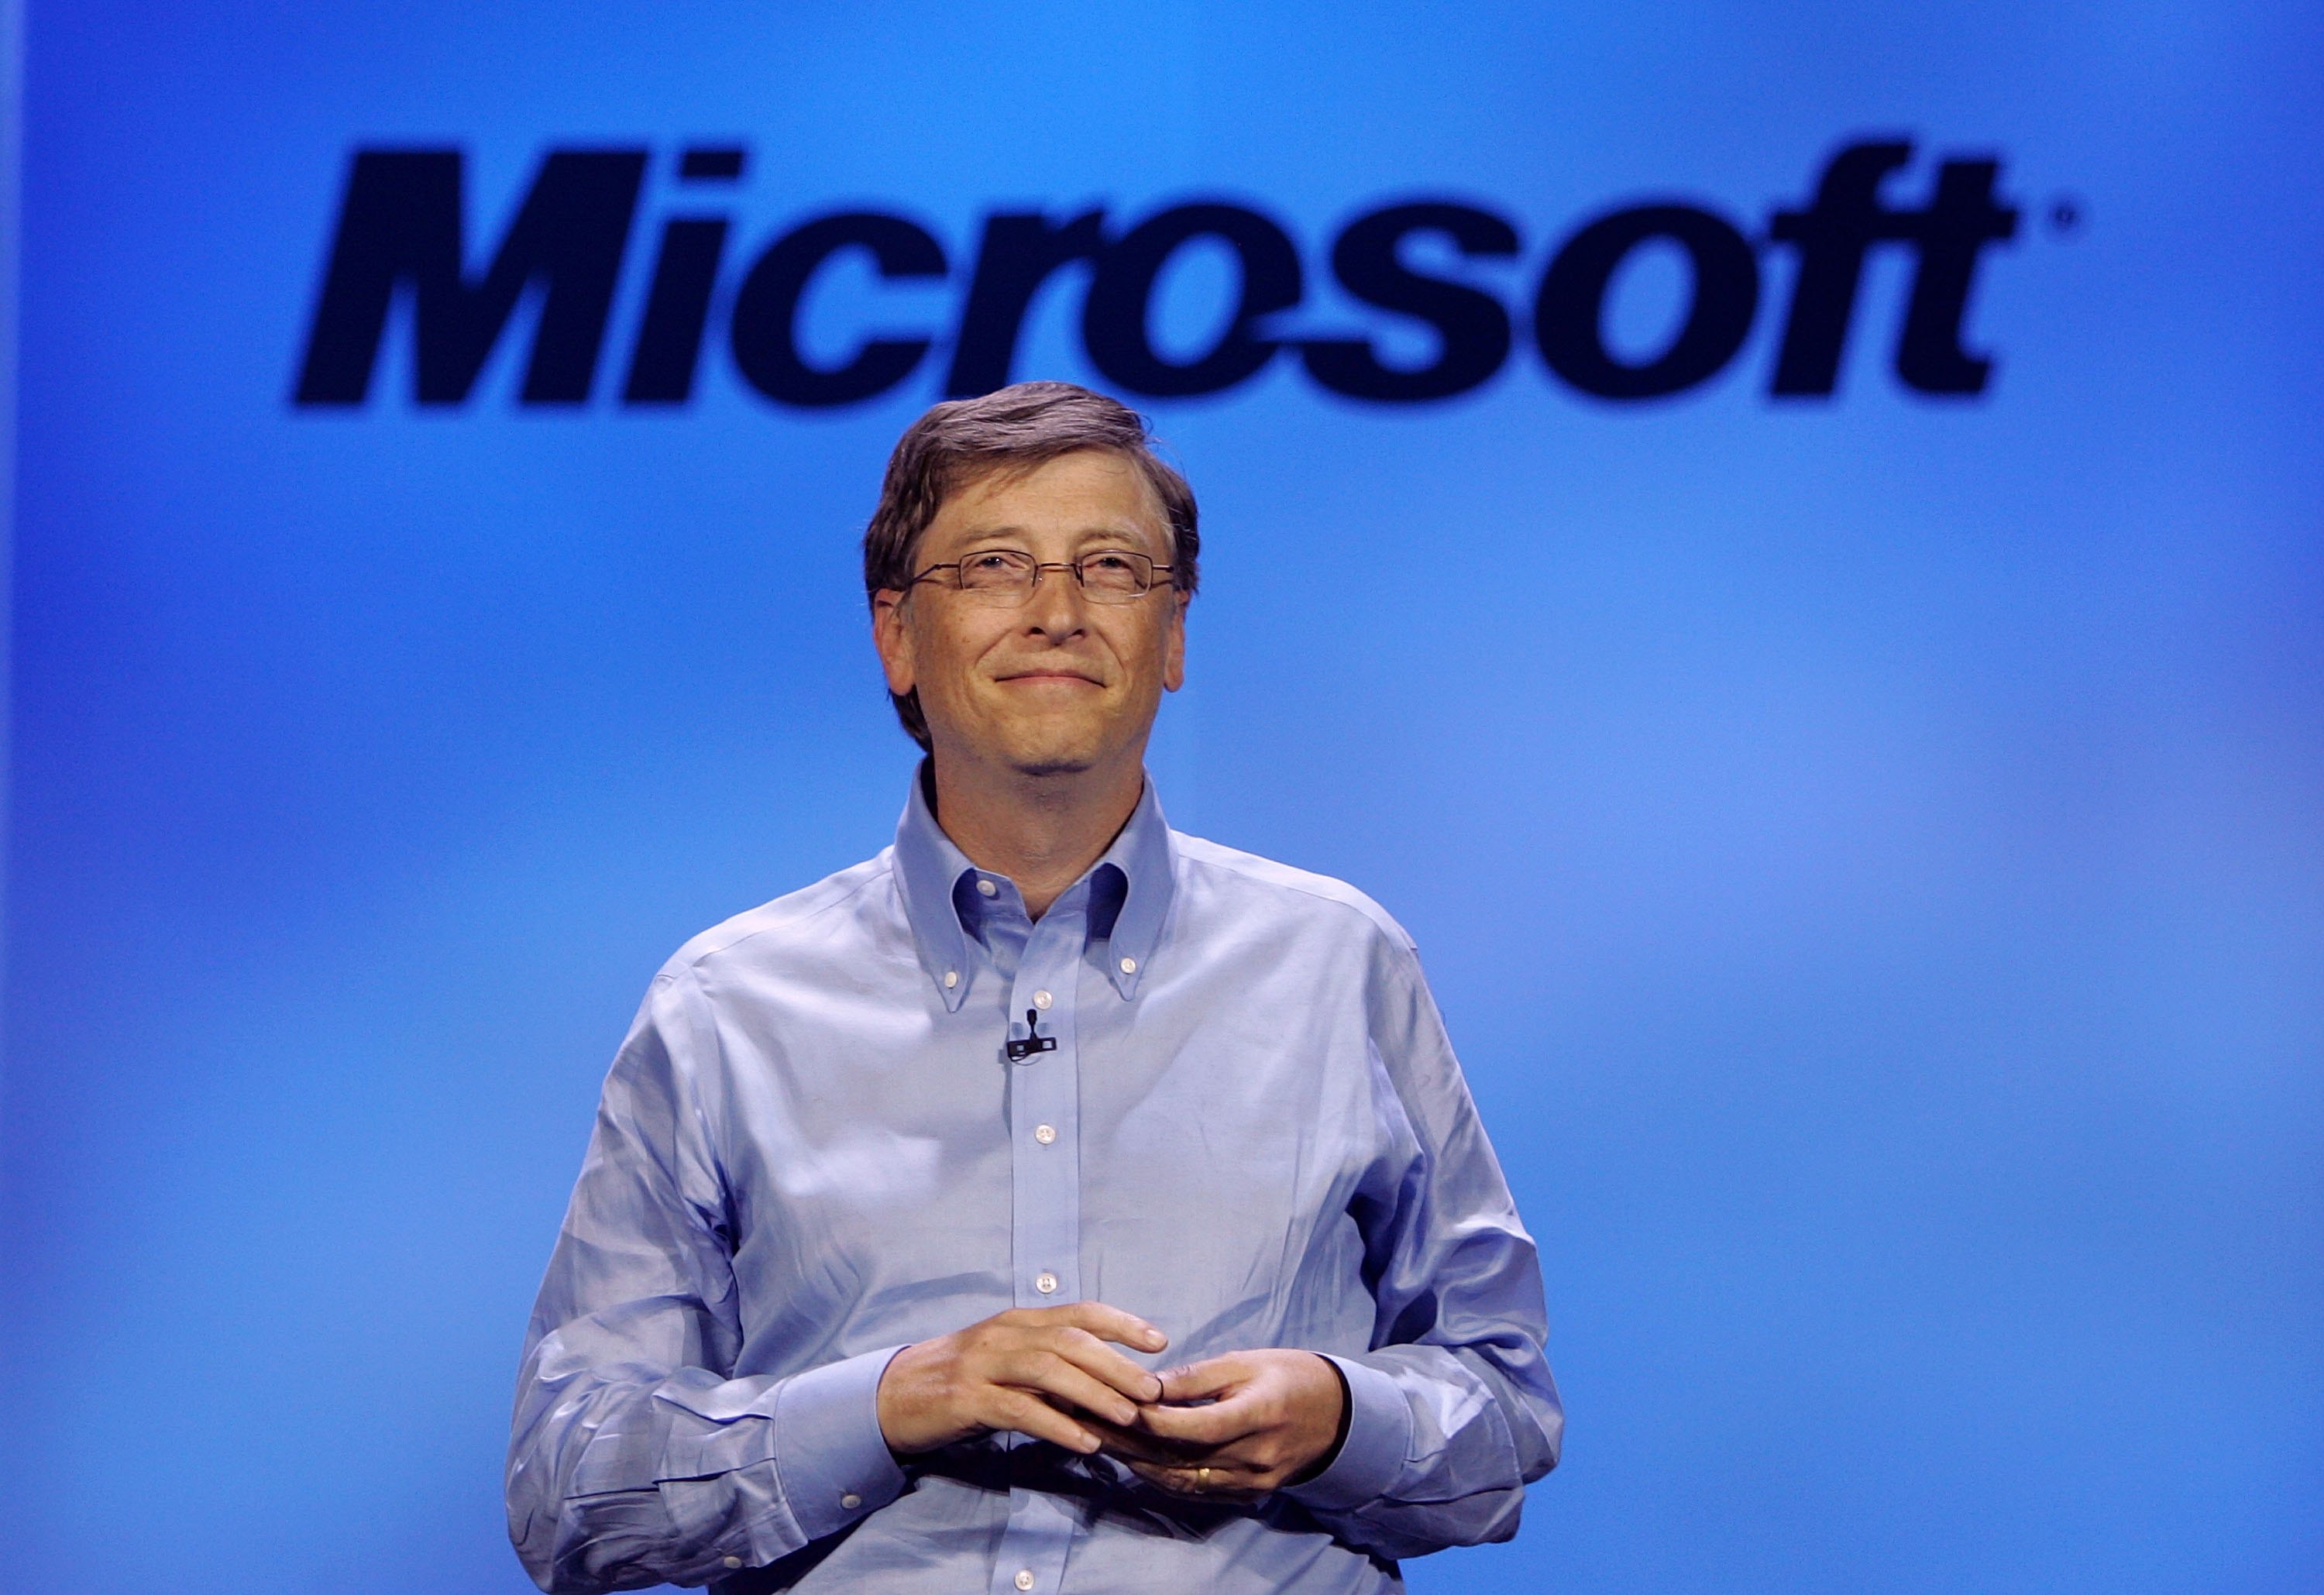 Microsoft chairman Bill Gates delivers a keynote address at the 40th annual Consumer Electronics Show (CES) convention January 7, 2007 in Las Vegas, Nevada.